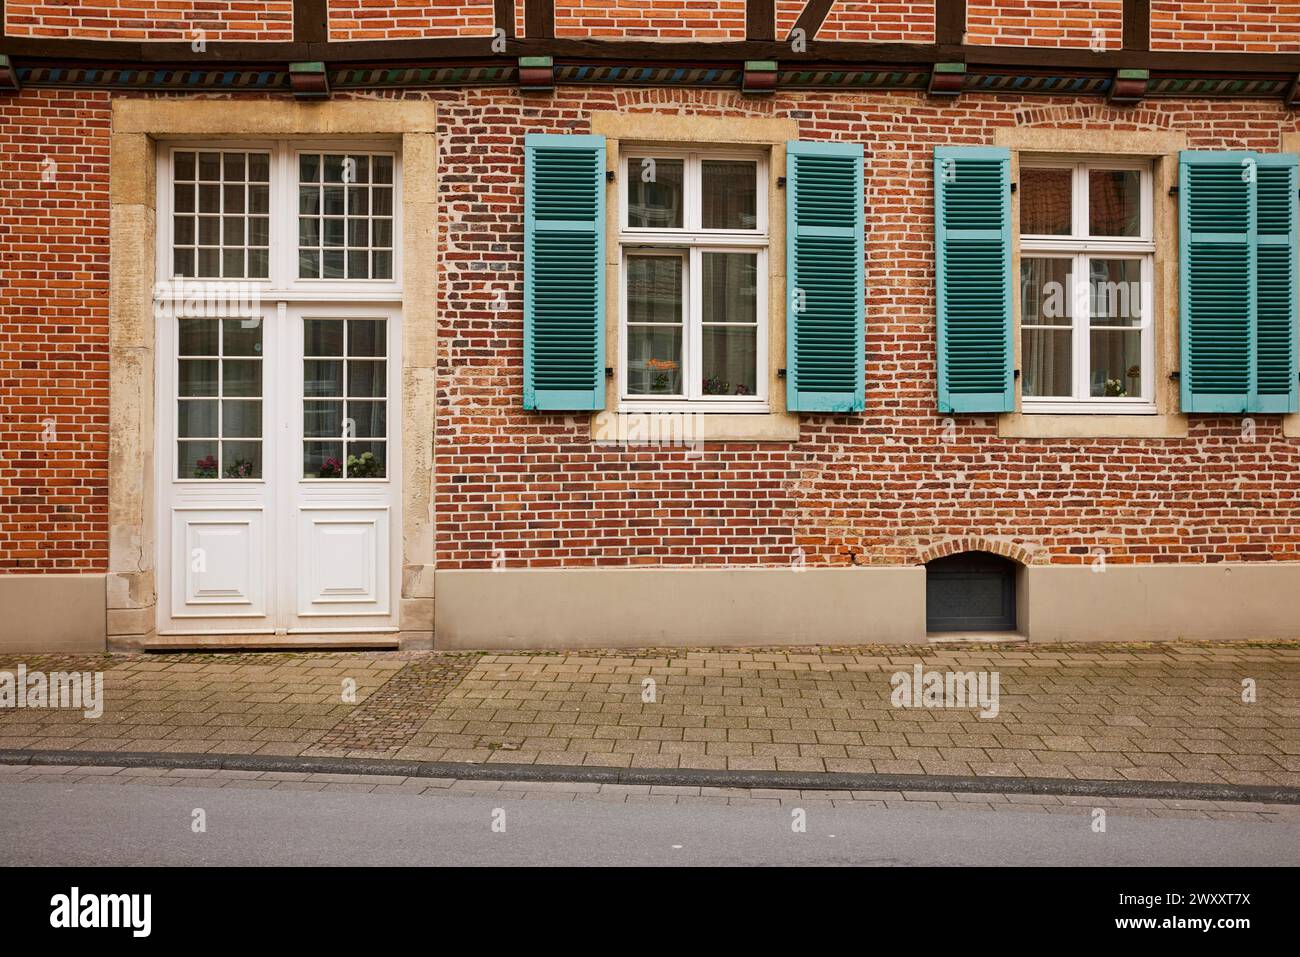 White entrance door and windows with blue-green shutters on a brick house in Warendorf, Warendorf district, North Rhine-Westphalia, Germany Stock Photo